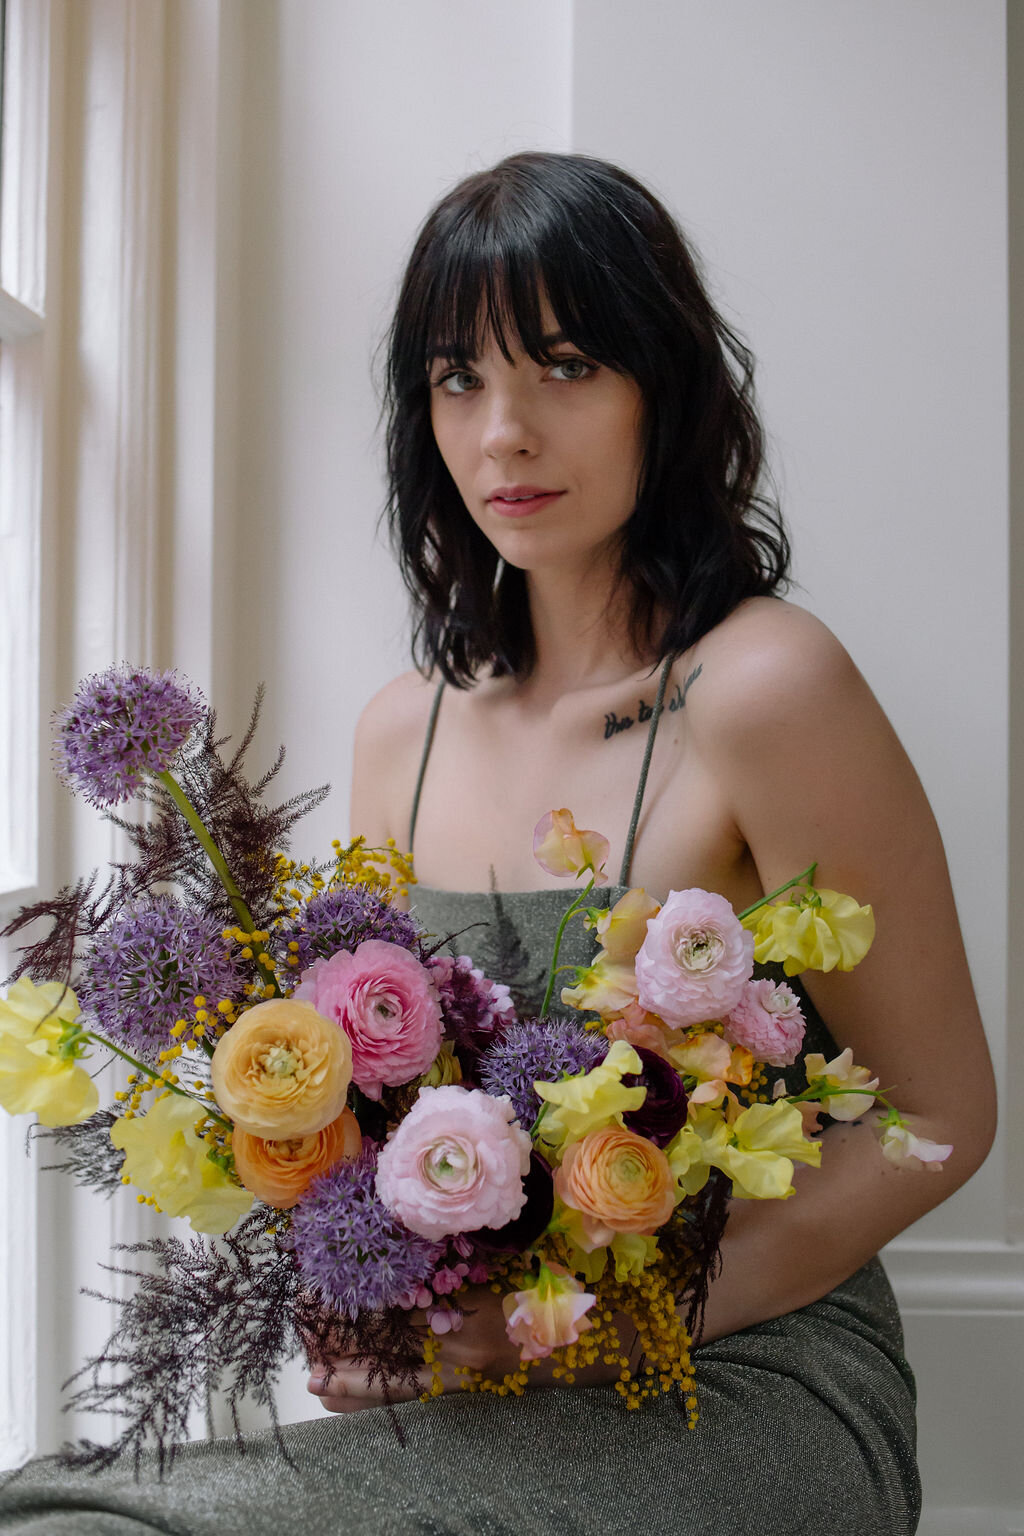 Modern, colorful bridal bouquet with yellow sweet peas, purple allium, pink and peach ranunculus, golden acacia, and painted eggplant plums fern. Nashville wedding florist. Printer’s Alley portraits.